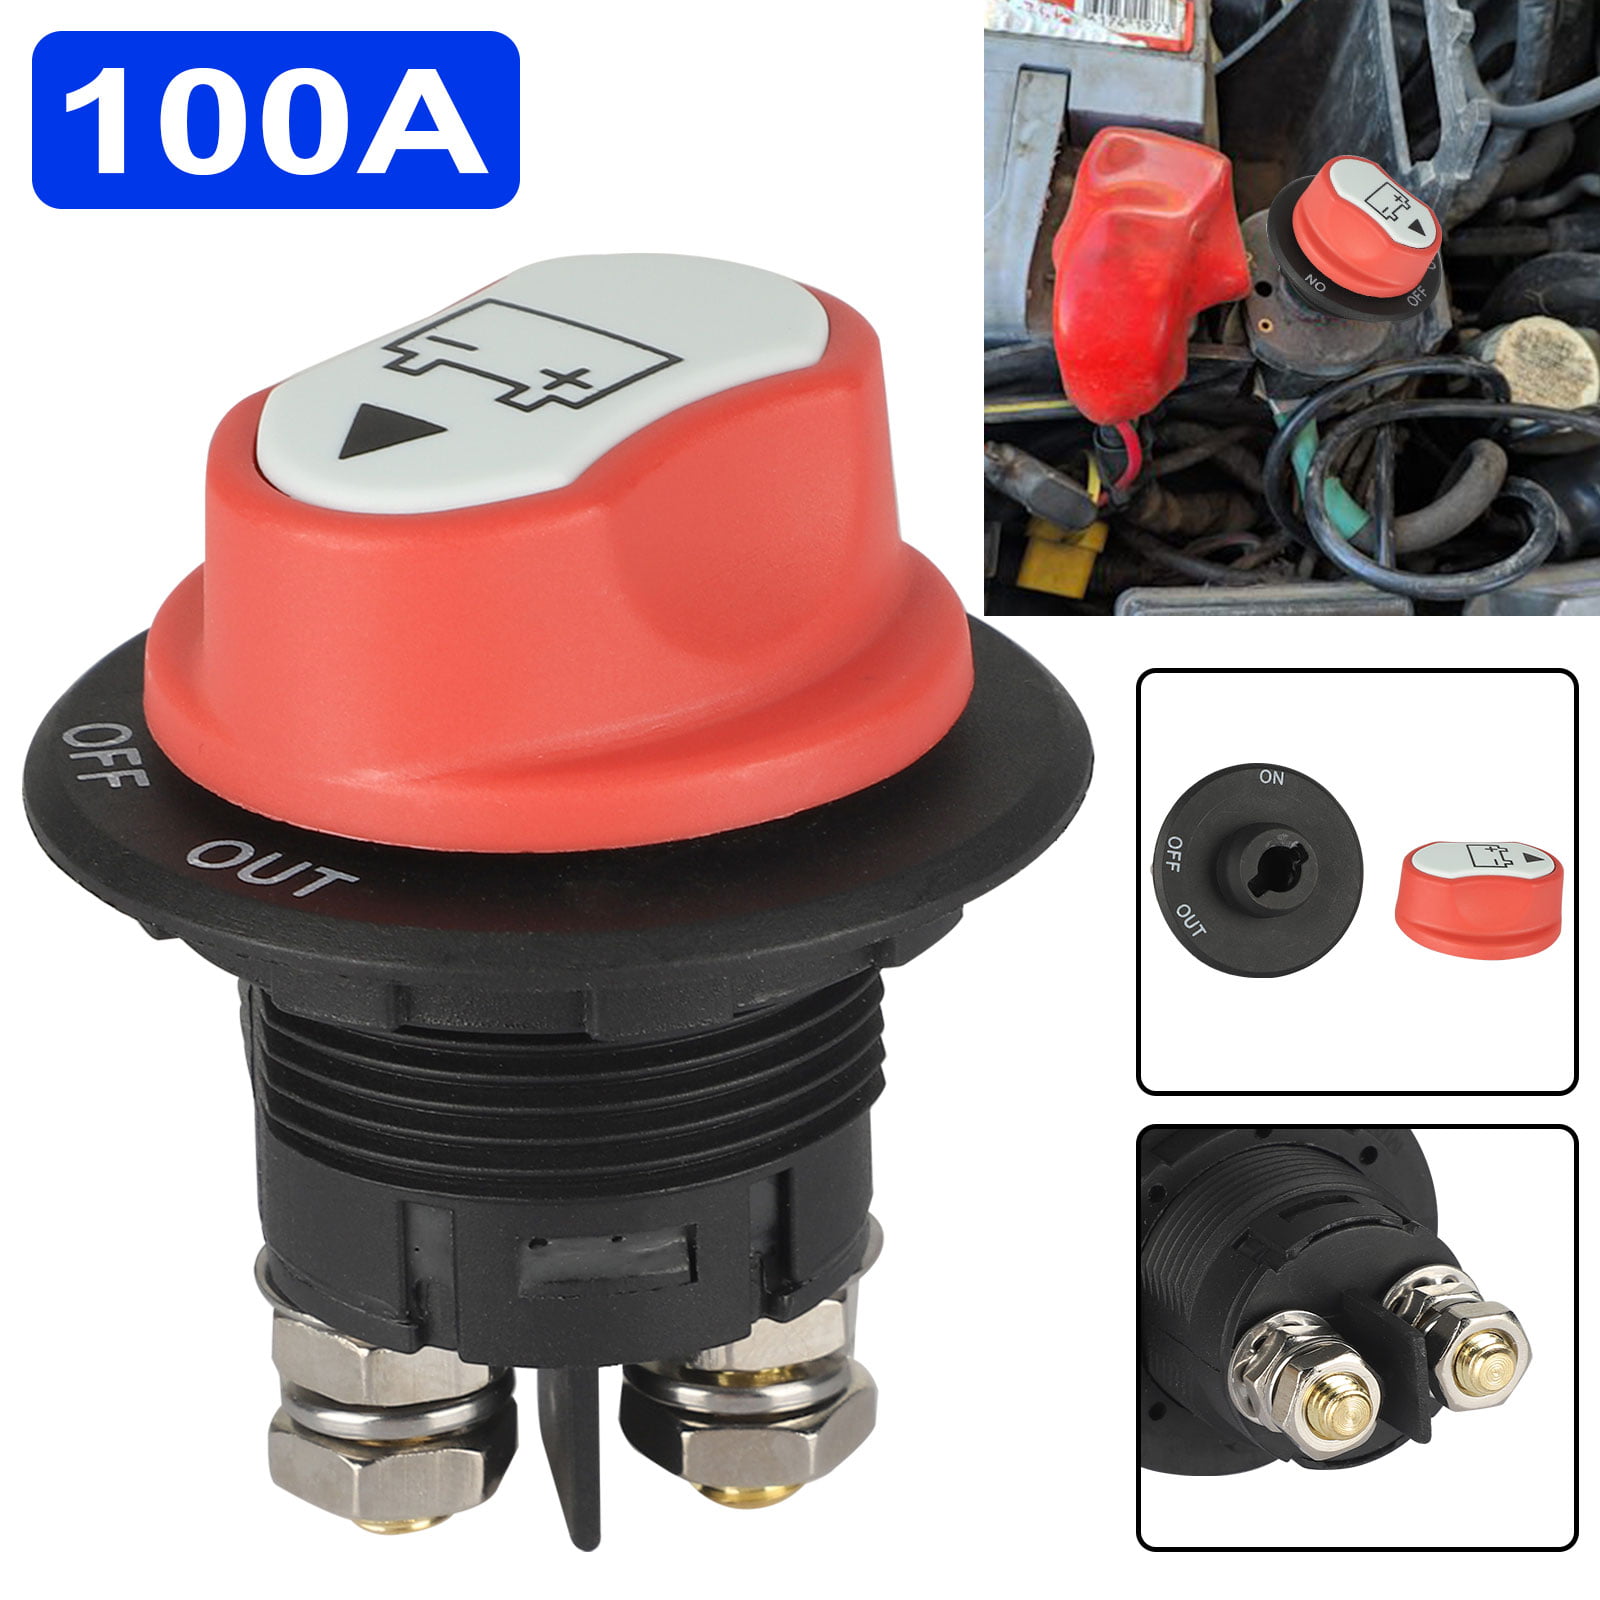 Battery Disconnect Switch 200 100a Battery Isolator Power Cut Off Master Switch Waterproof For Rv Atv Car Marine Boat Off Road Vehicles Trucks Motorcycle On Off Position Master Cut Off Switch Walmart Com